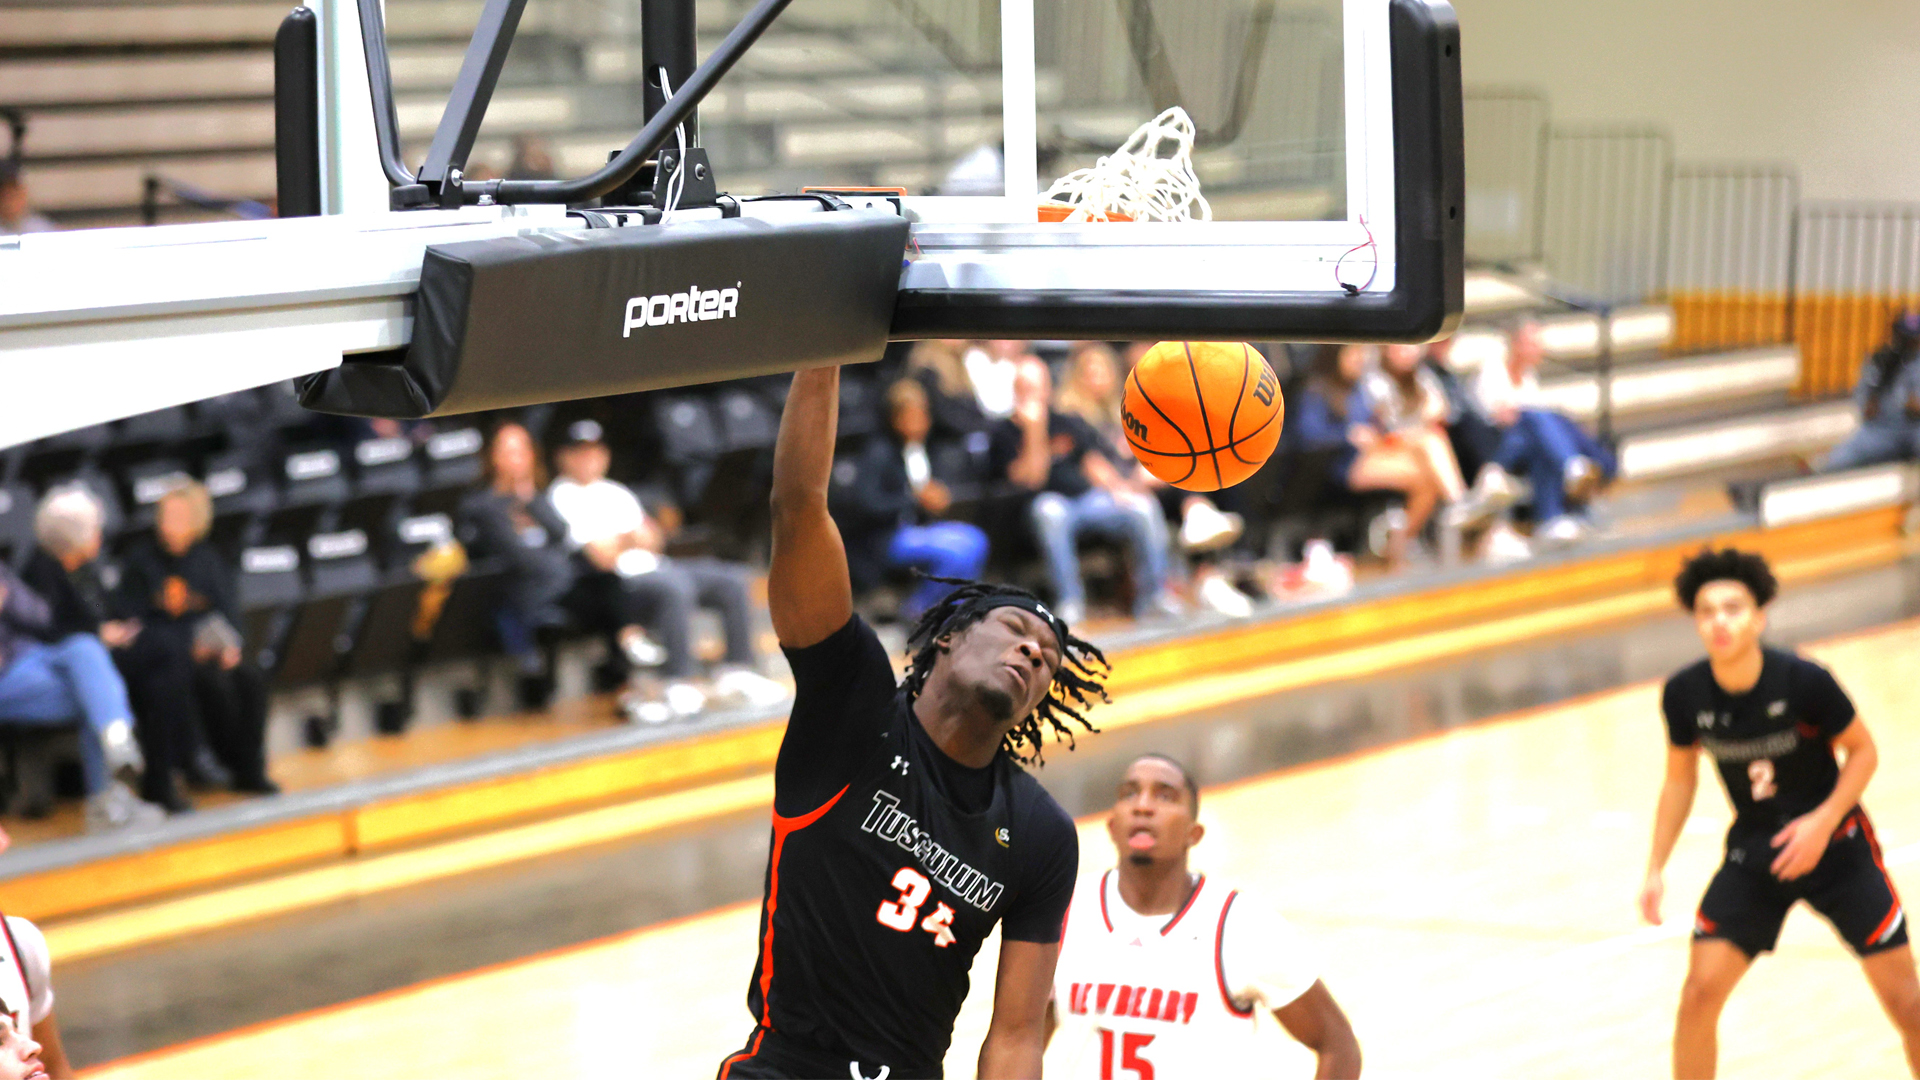 Tusculum's Akeem Odusipe puts down this dunk as the Pioneers win 73-62 over Newberry (photo by Brandon Johnson).